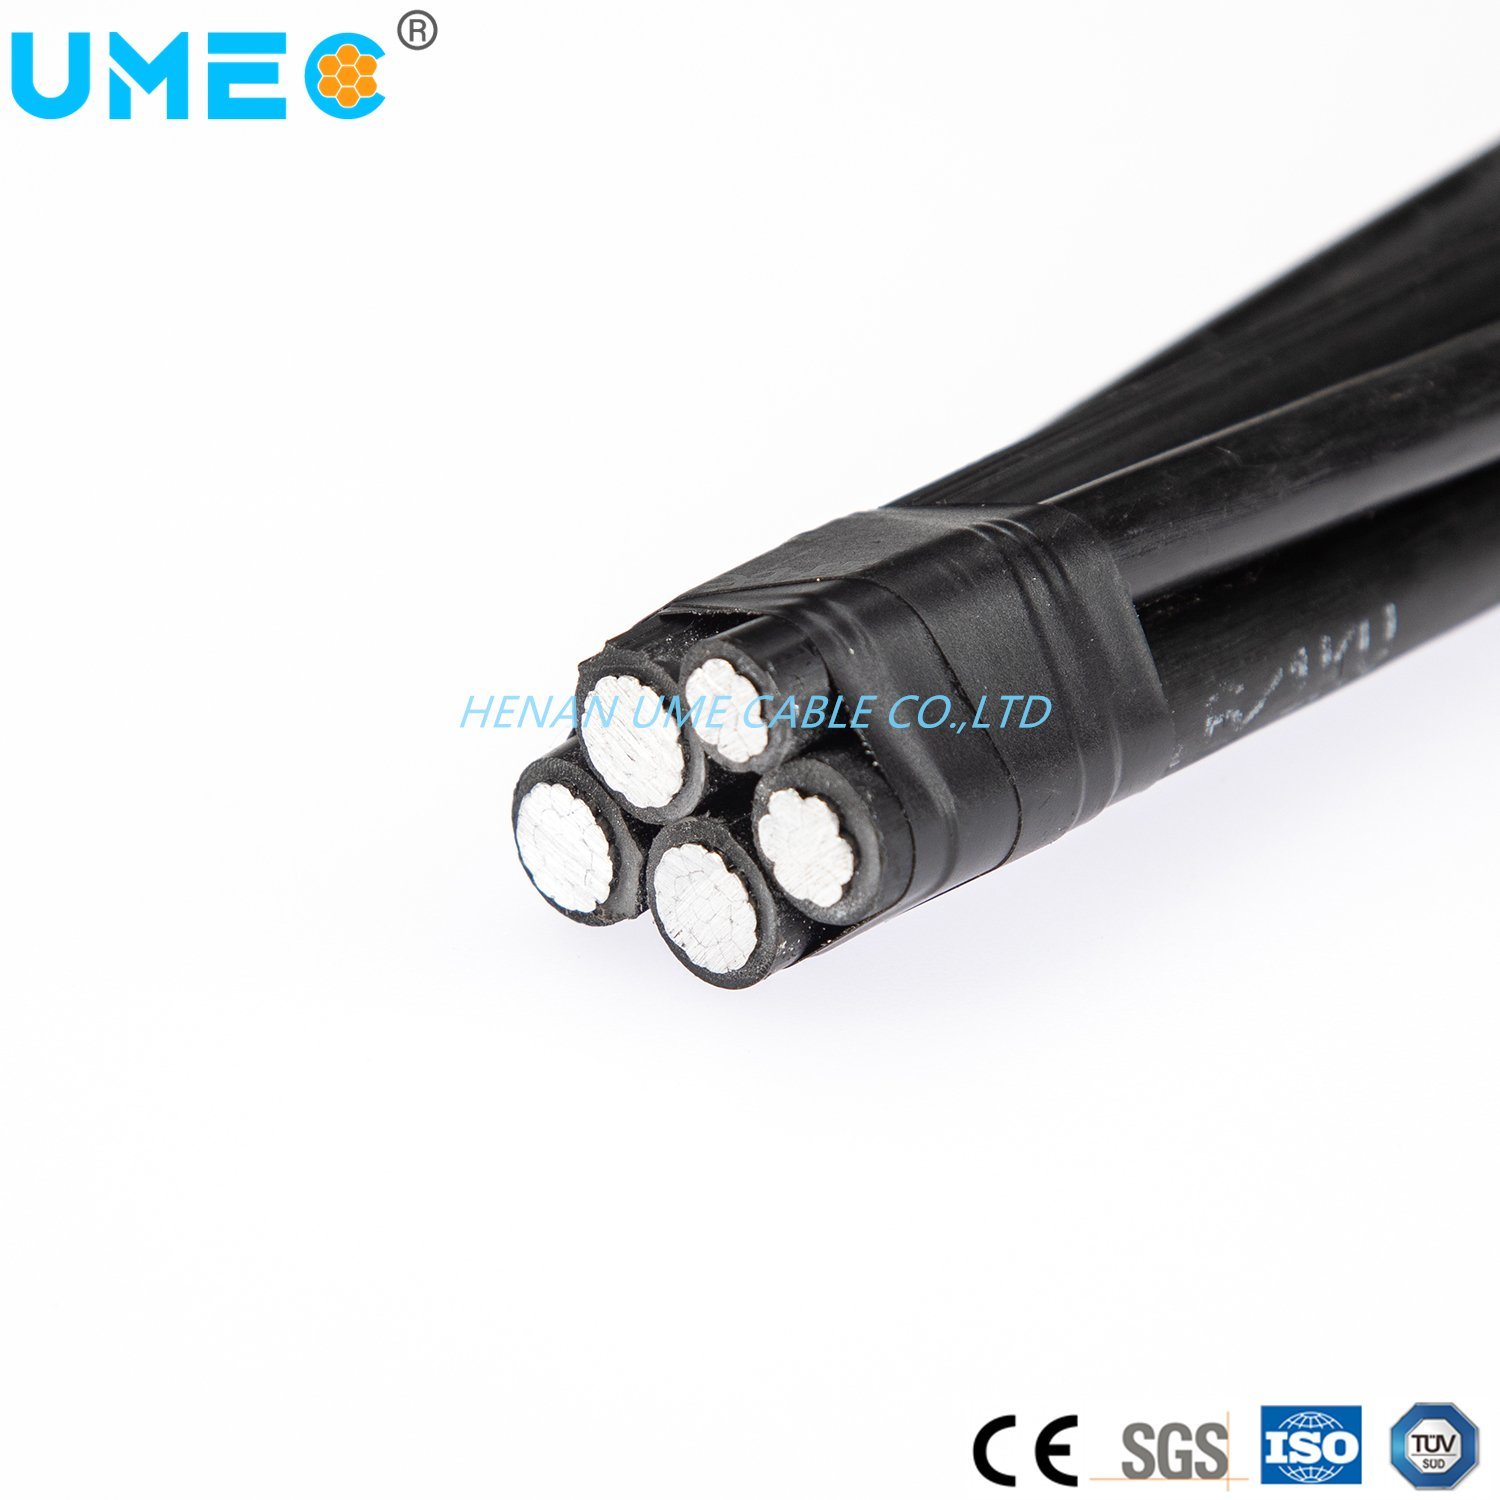 Low Voltage Overhead Aerial Bundled ABC Cable Manufactures 5 Core Caai Aluminum Conductor Cable